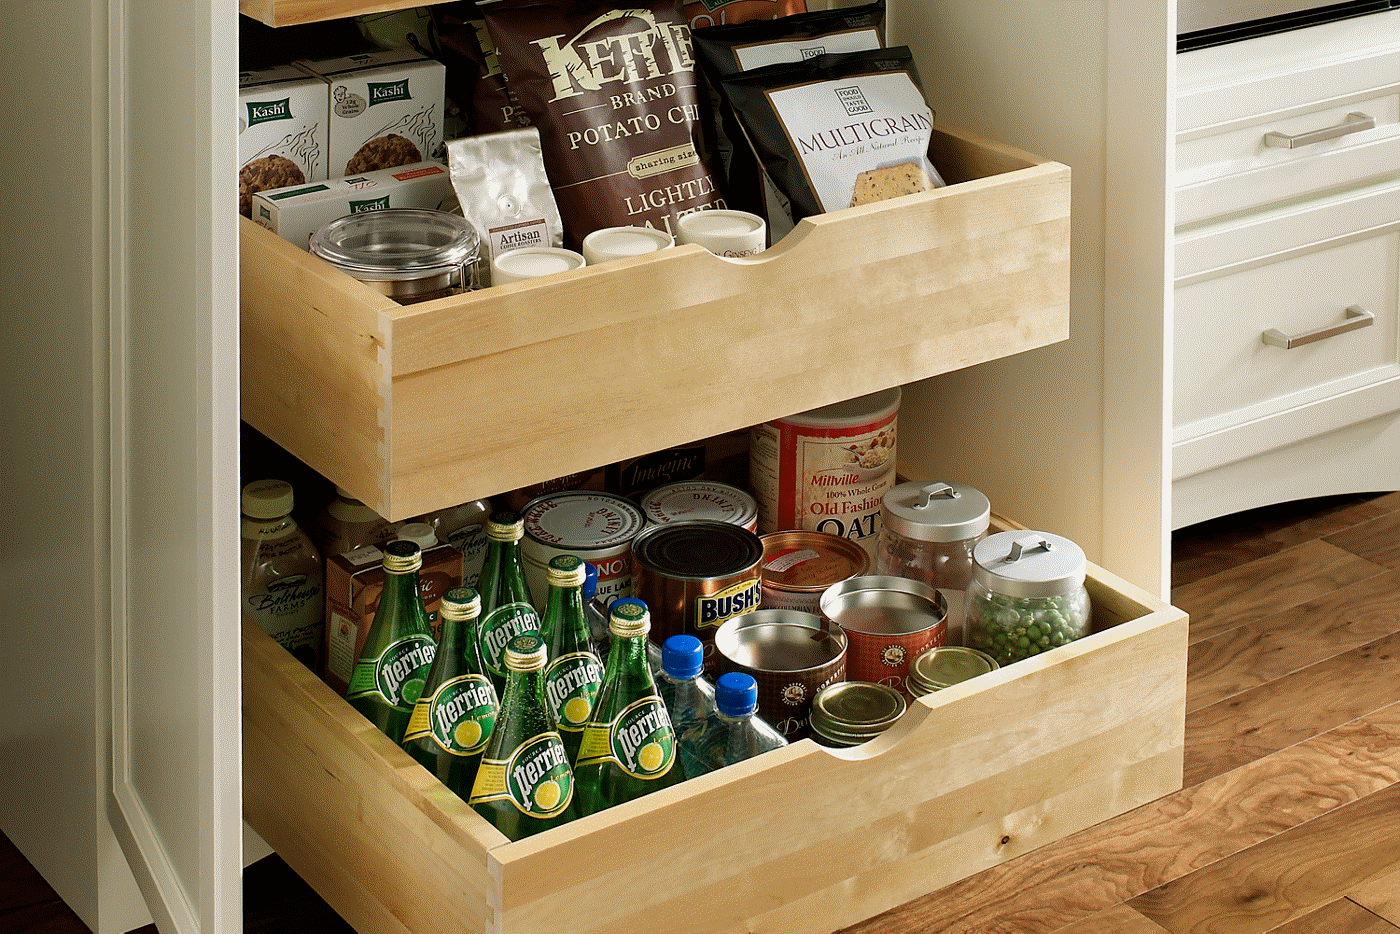 Medallion Cabinetry - Pull-out Spice Rack